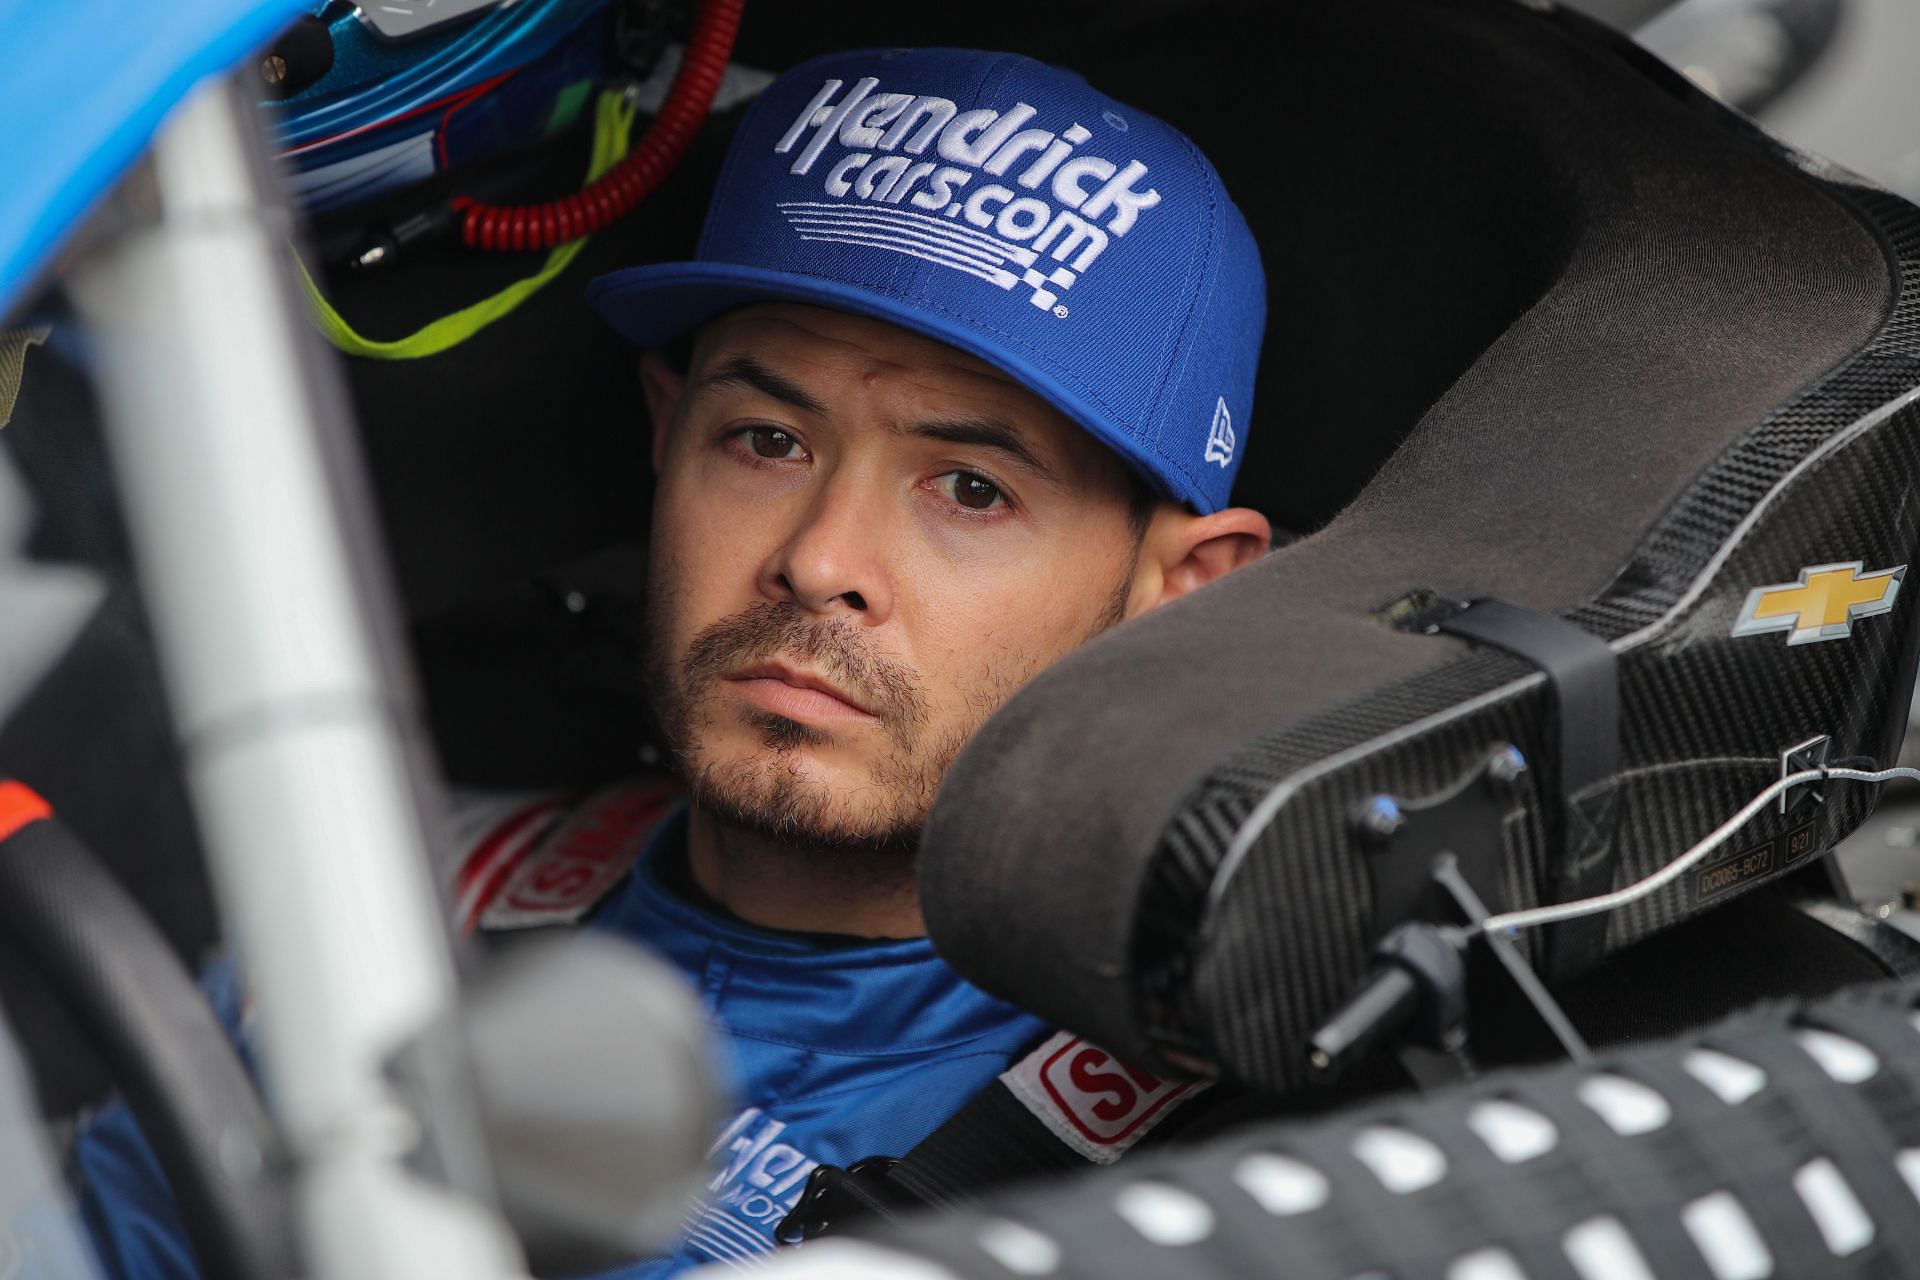 Kyle Larson sits in his car during qualifying for the NASCAR Cup Series Blue-Emu Maximum Pain Relief 400 at Martinsville Speedway.